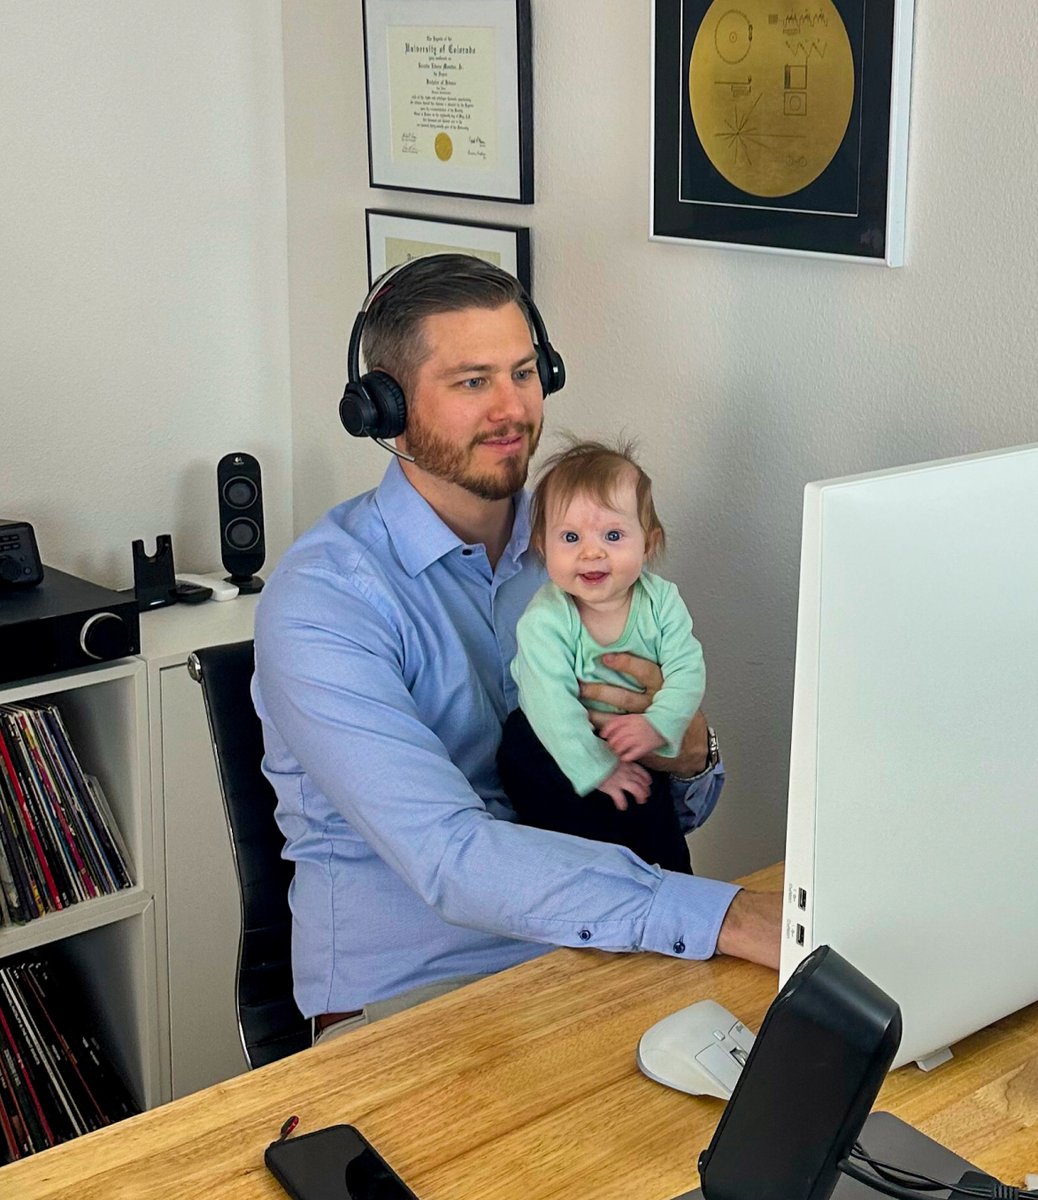 When the worlds of fatherhood and consulting collide, out comes the perfect blend of cuteness and ambition! Meet the new boss, she's not just taking charge of my workspace, but also my heart! #DaddysLittleGirl #FutureCEO #TechPrincess #CutenessOverload